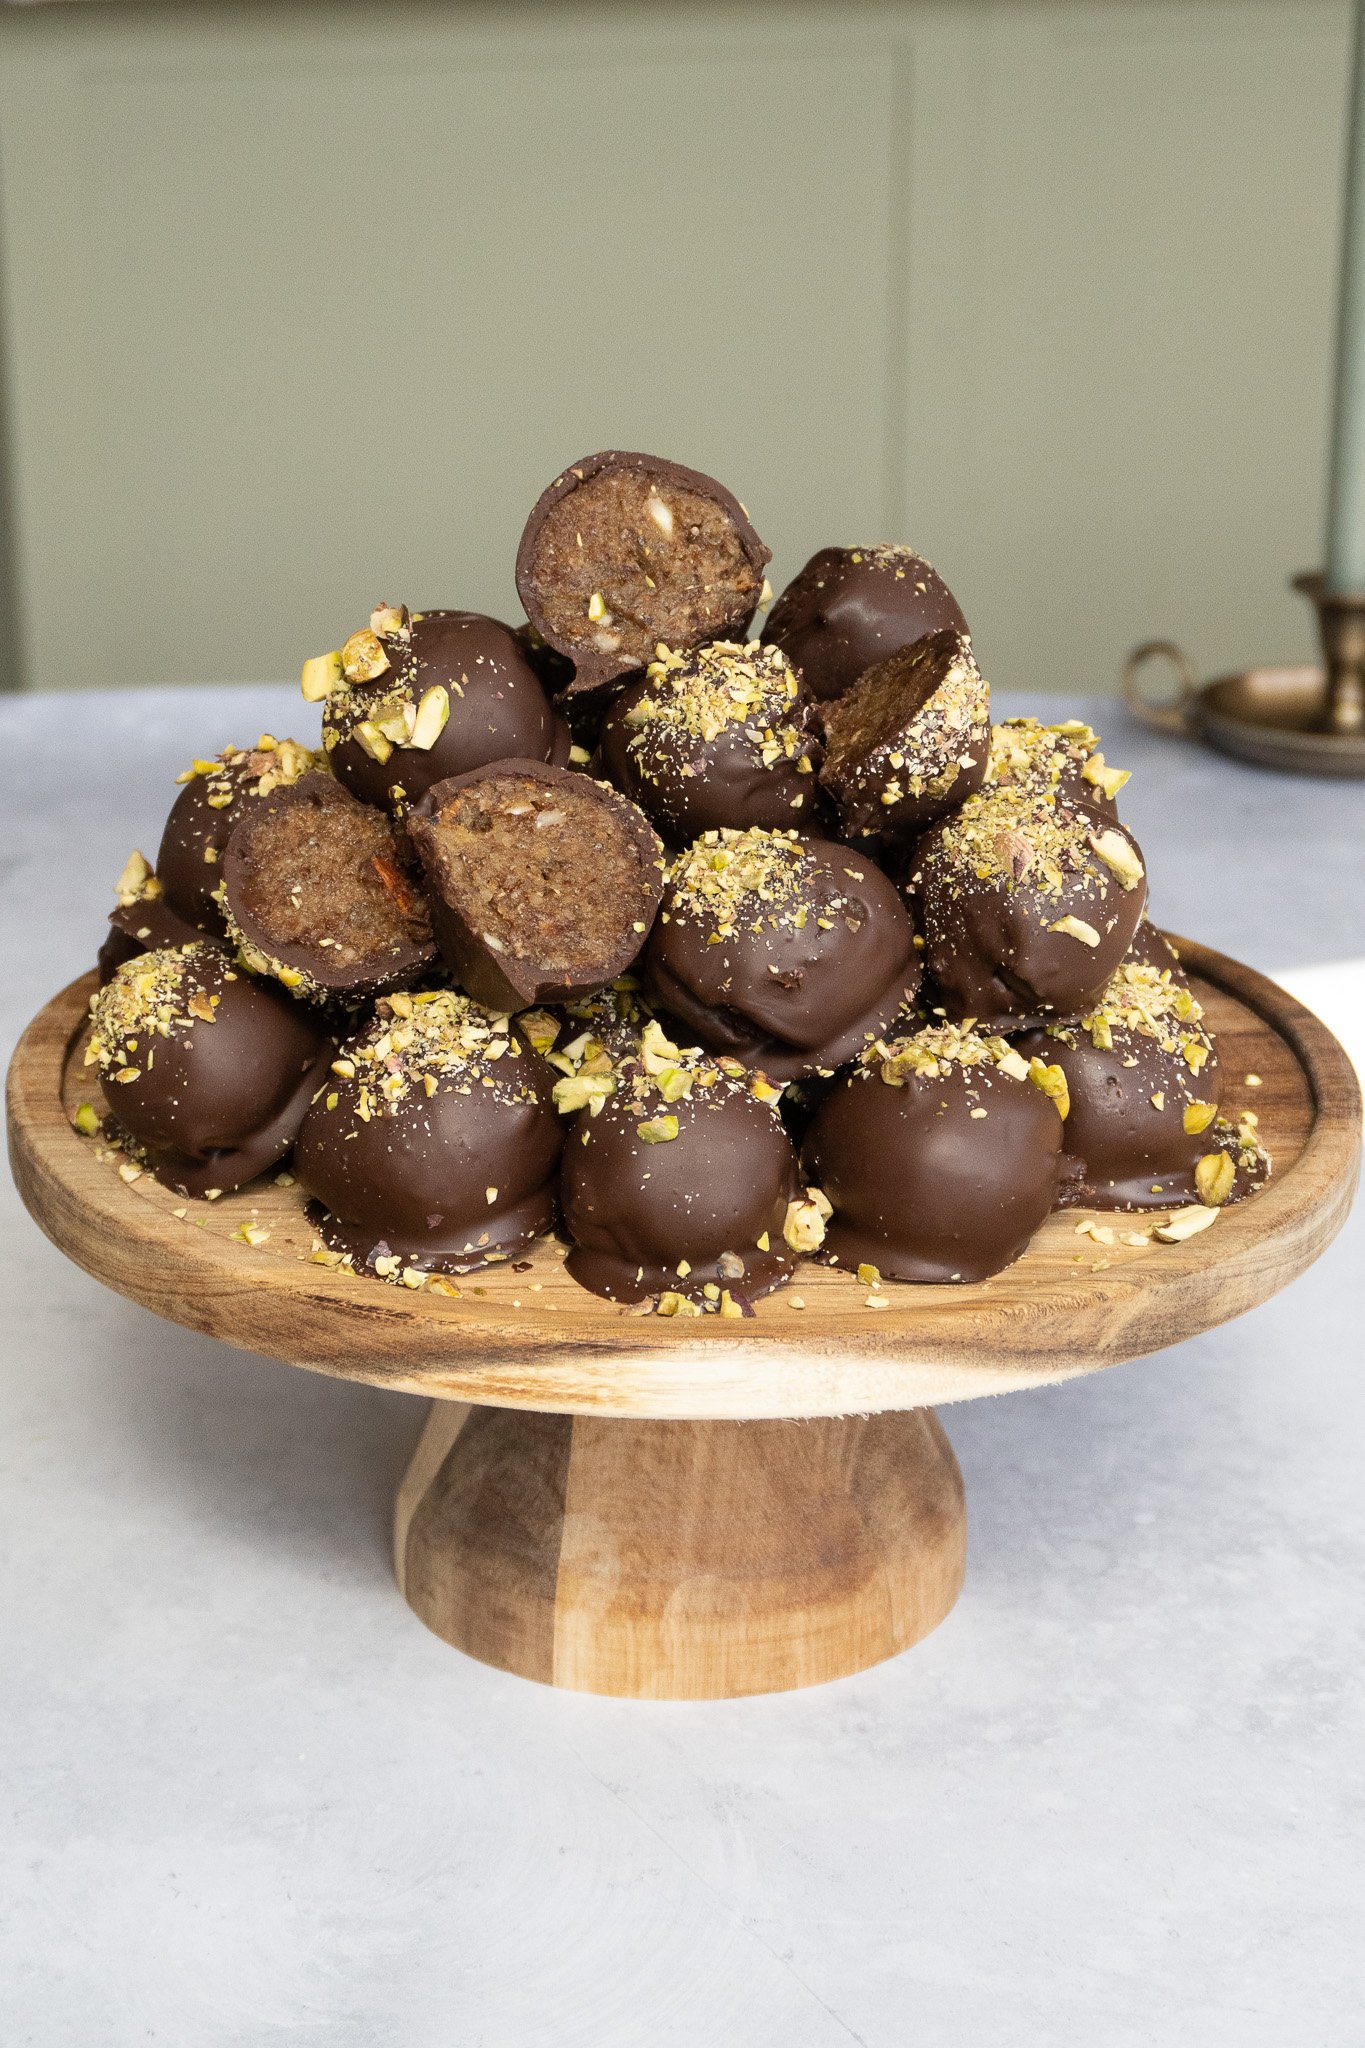 A tray of homemade chocolate date truffles, ready to be served for dessert.